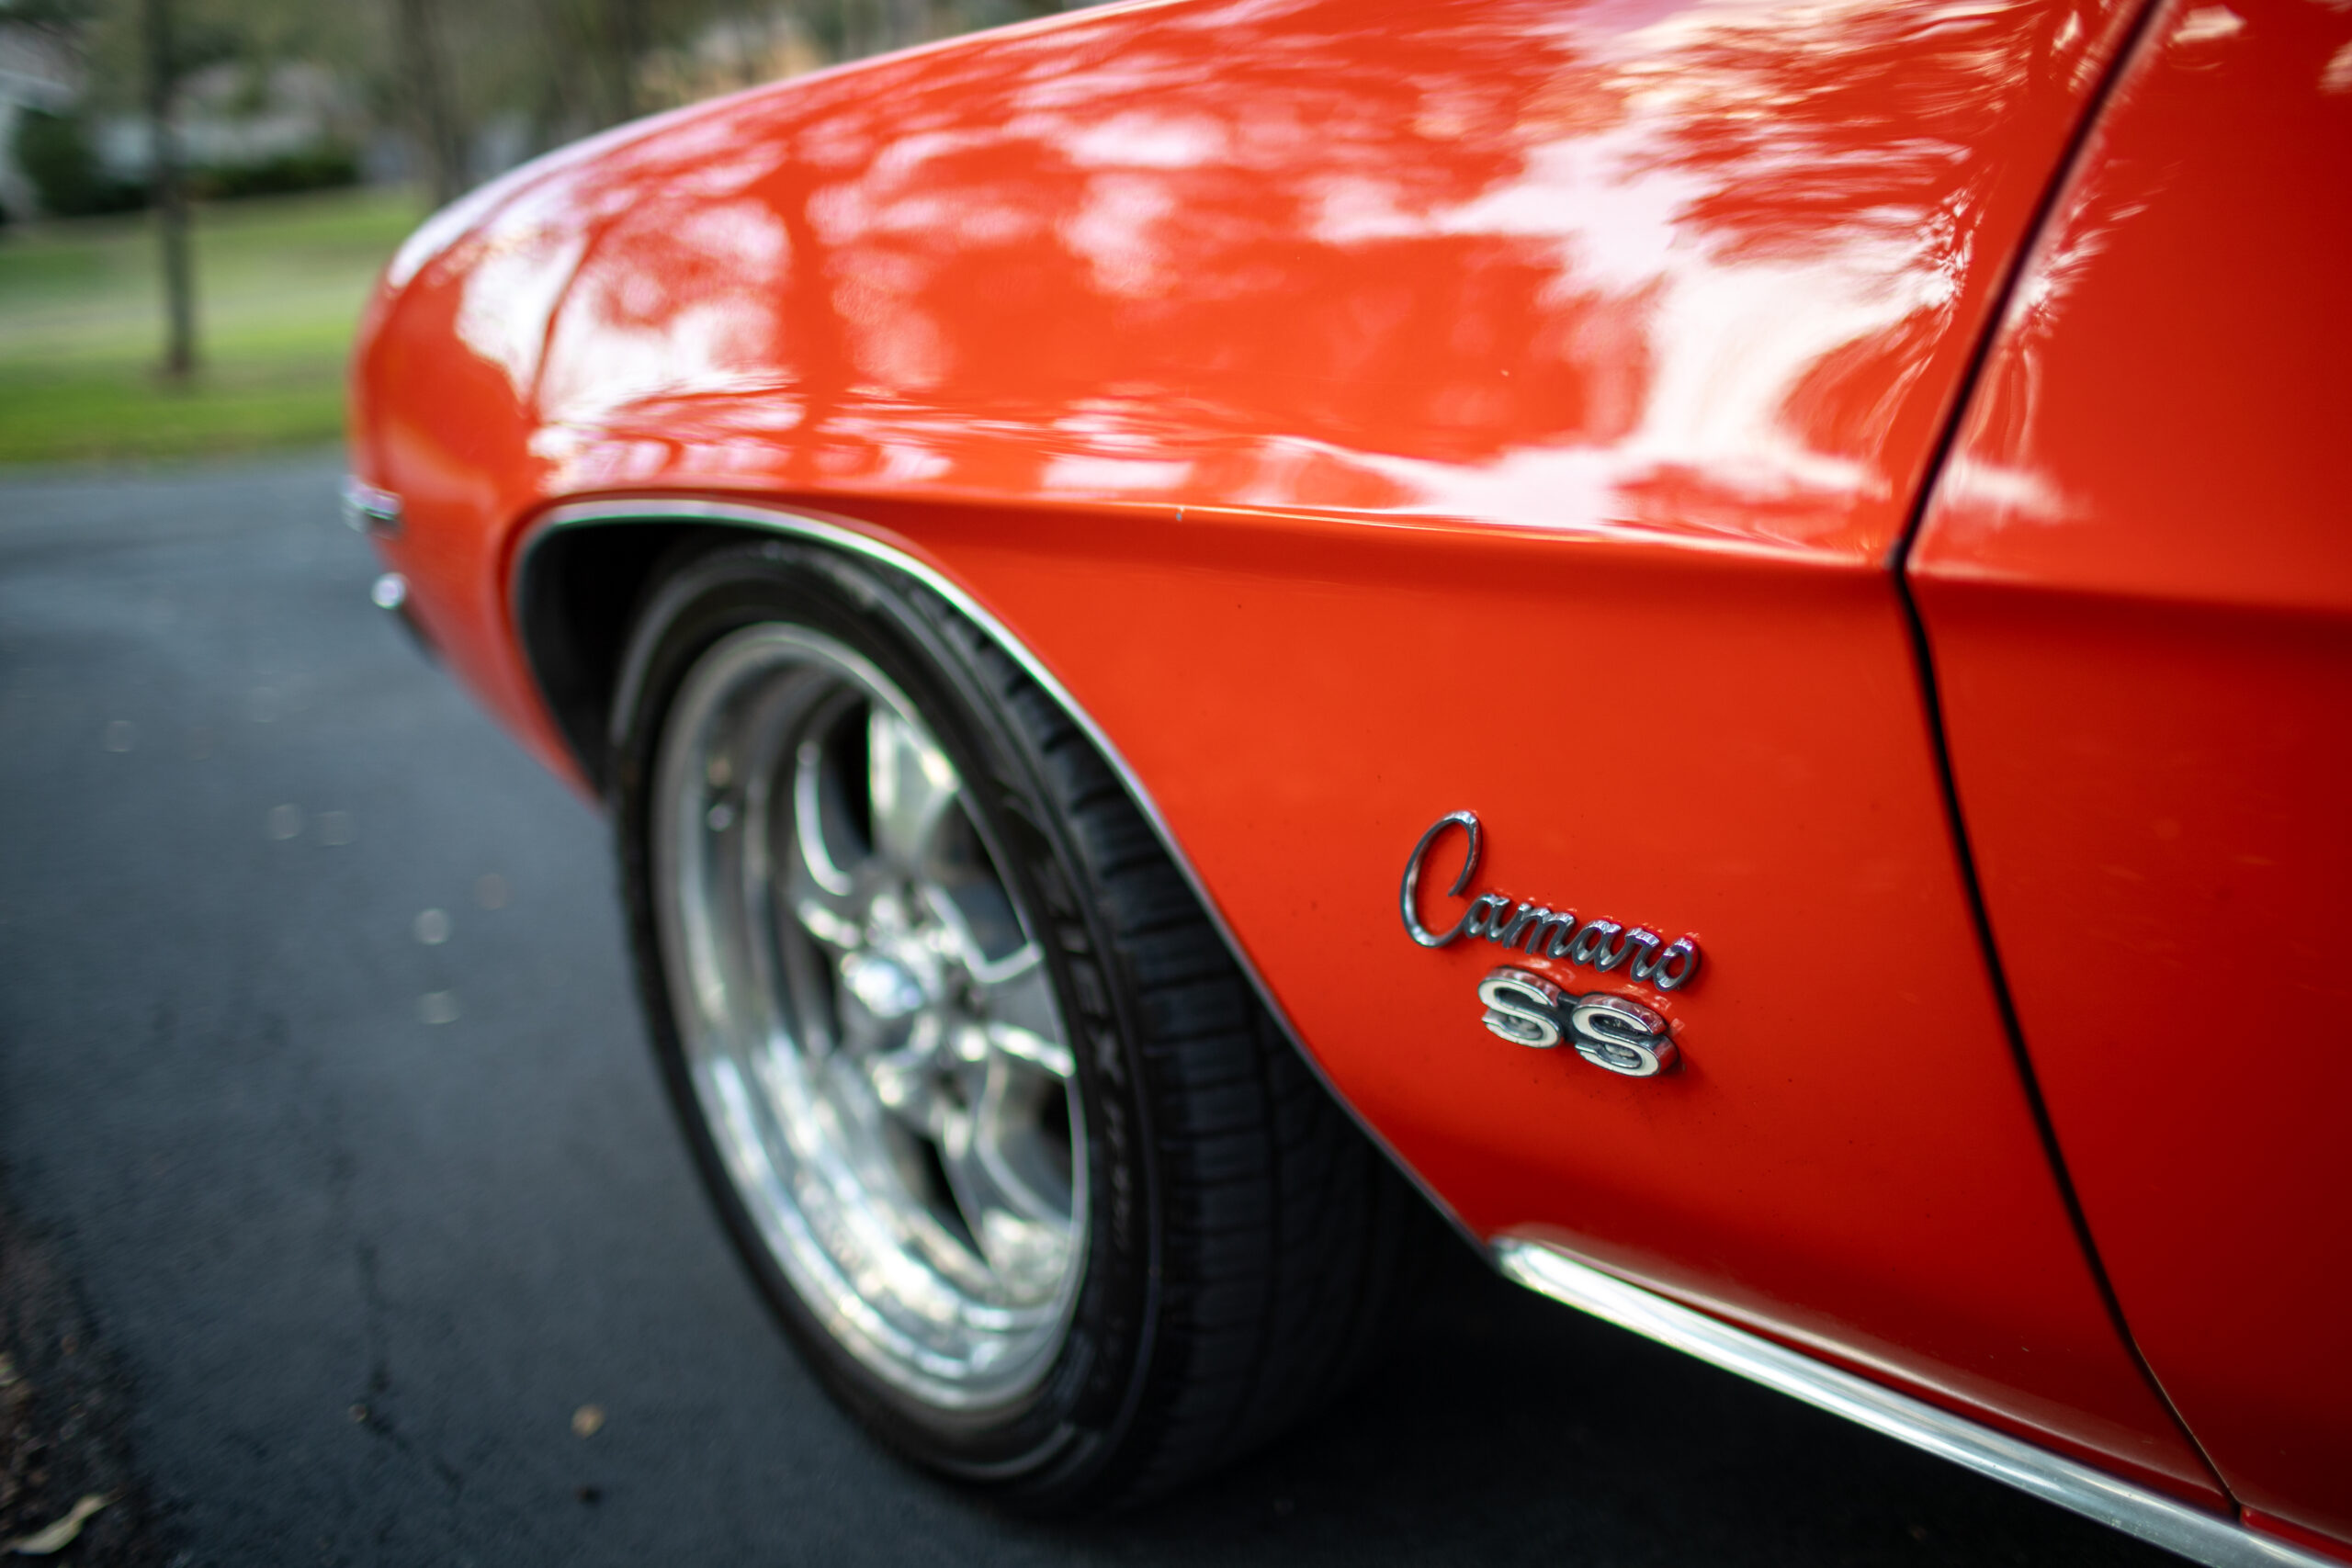 Close-up view of a red Chevrolet Camaro SS parked on a pavement, showcasing the "Camaro SS" emblem and a portion of the car's wheel.